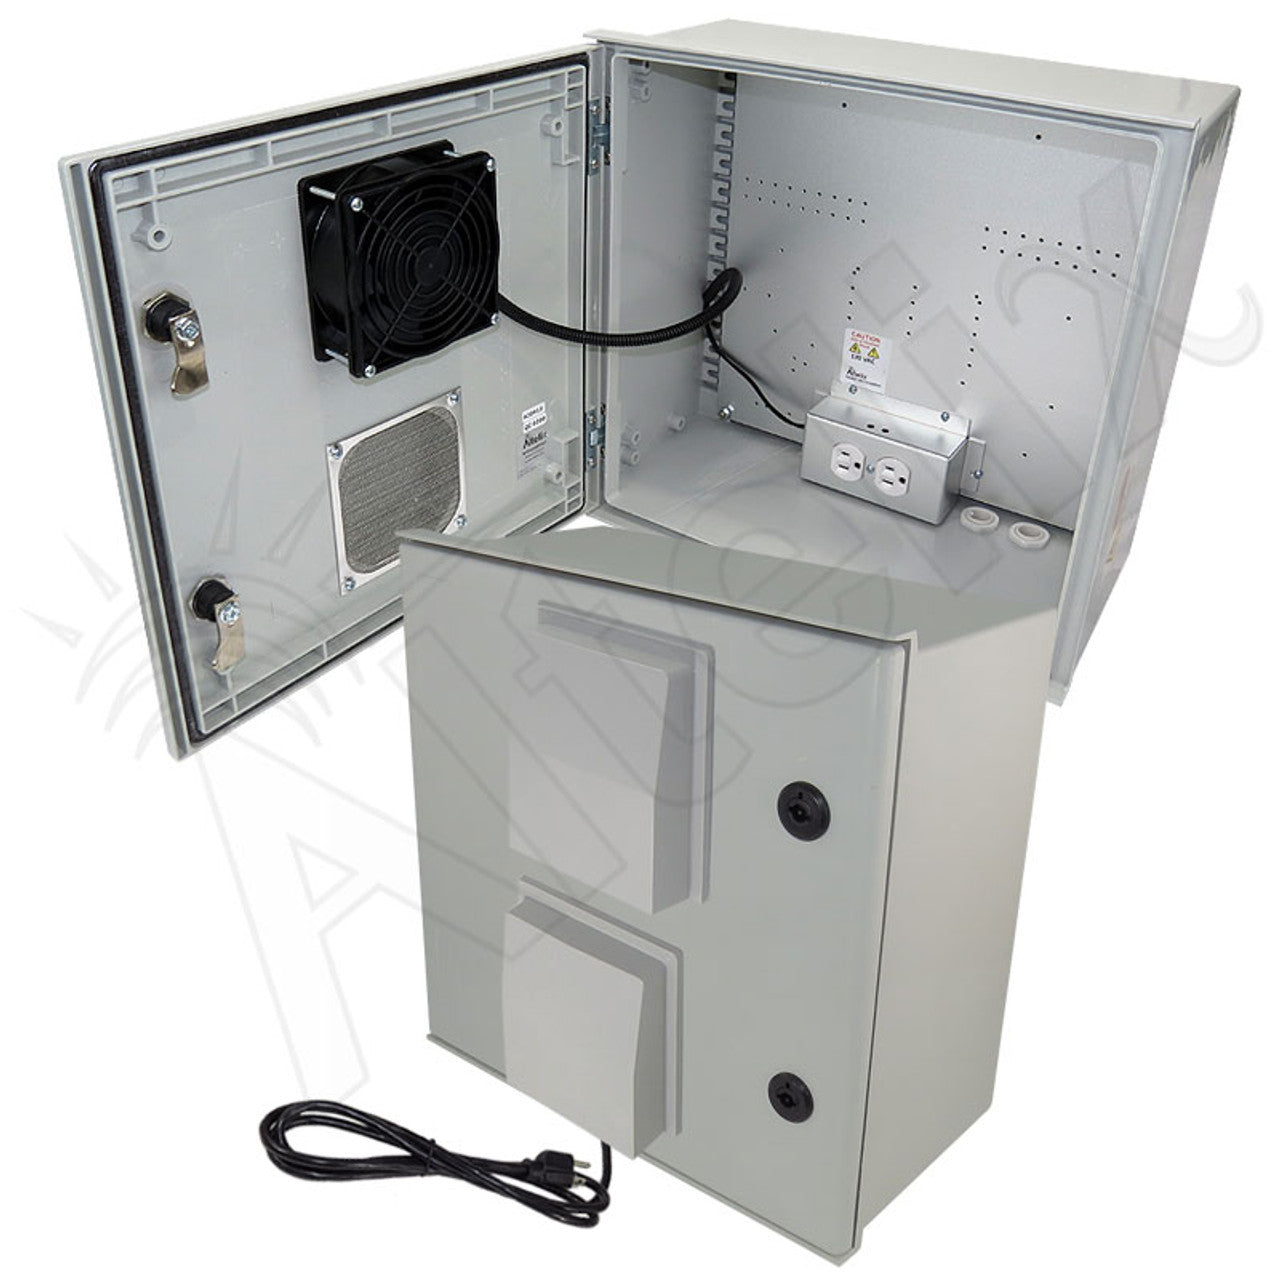 Altelix Vented Fiberglass Weatherproof NEMA Enclosure with 120 VAC Outlets, Power Cord & 85°F Turn-On Cooling Fan-4